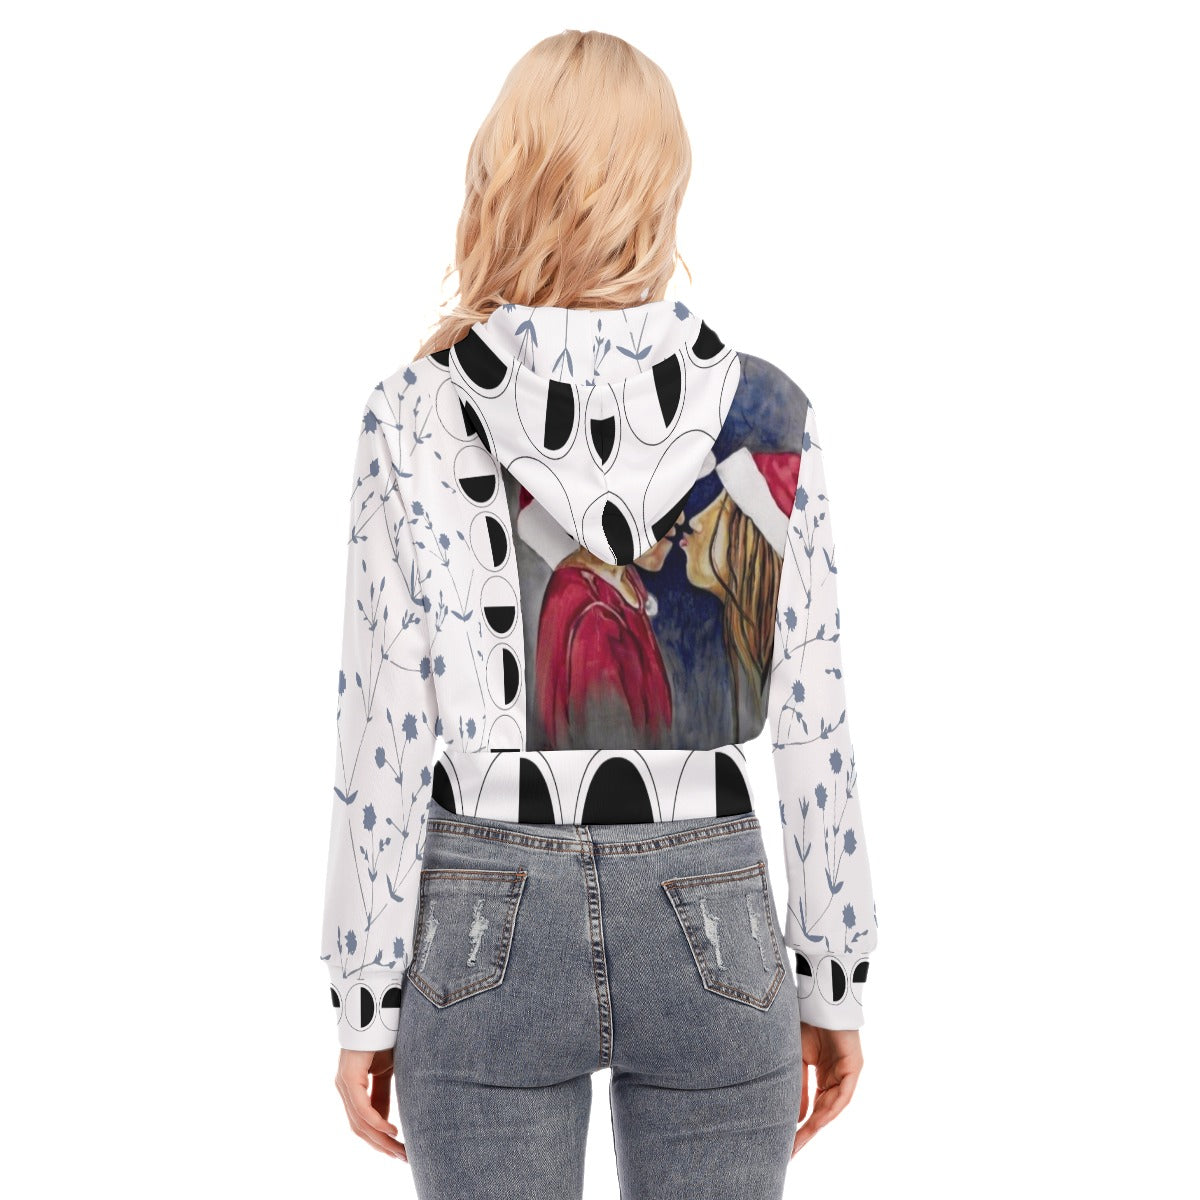 All-Over Print Women's Crop Top Hoodie With Zipper Closure Winter Collection 2023 by CRW